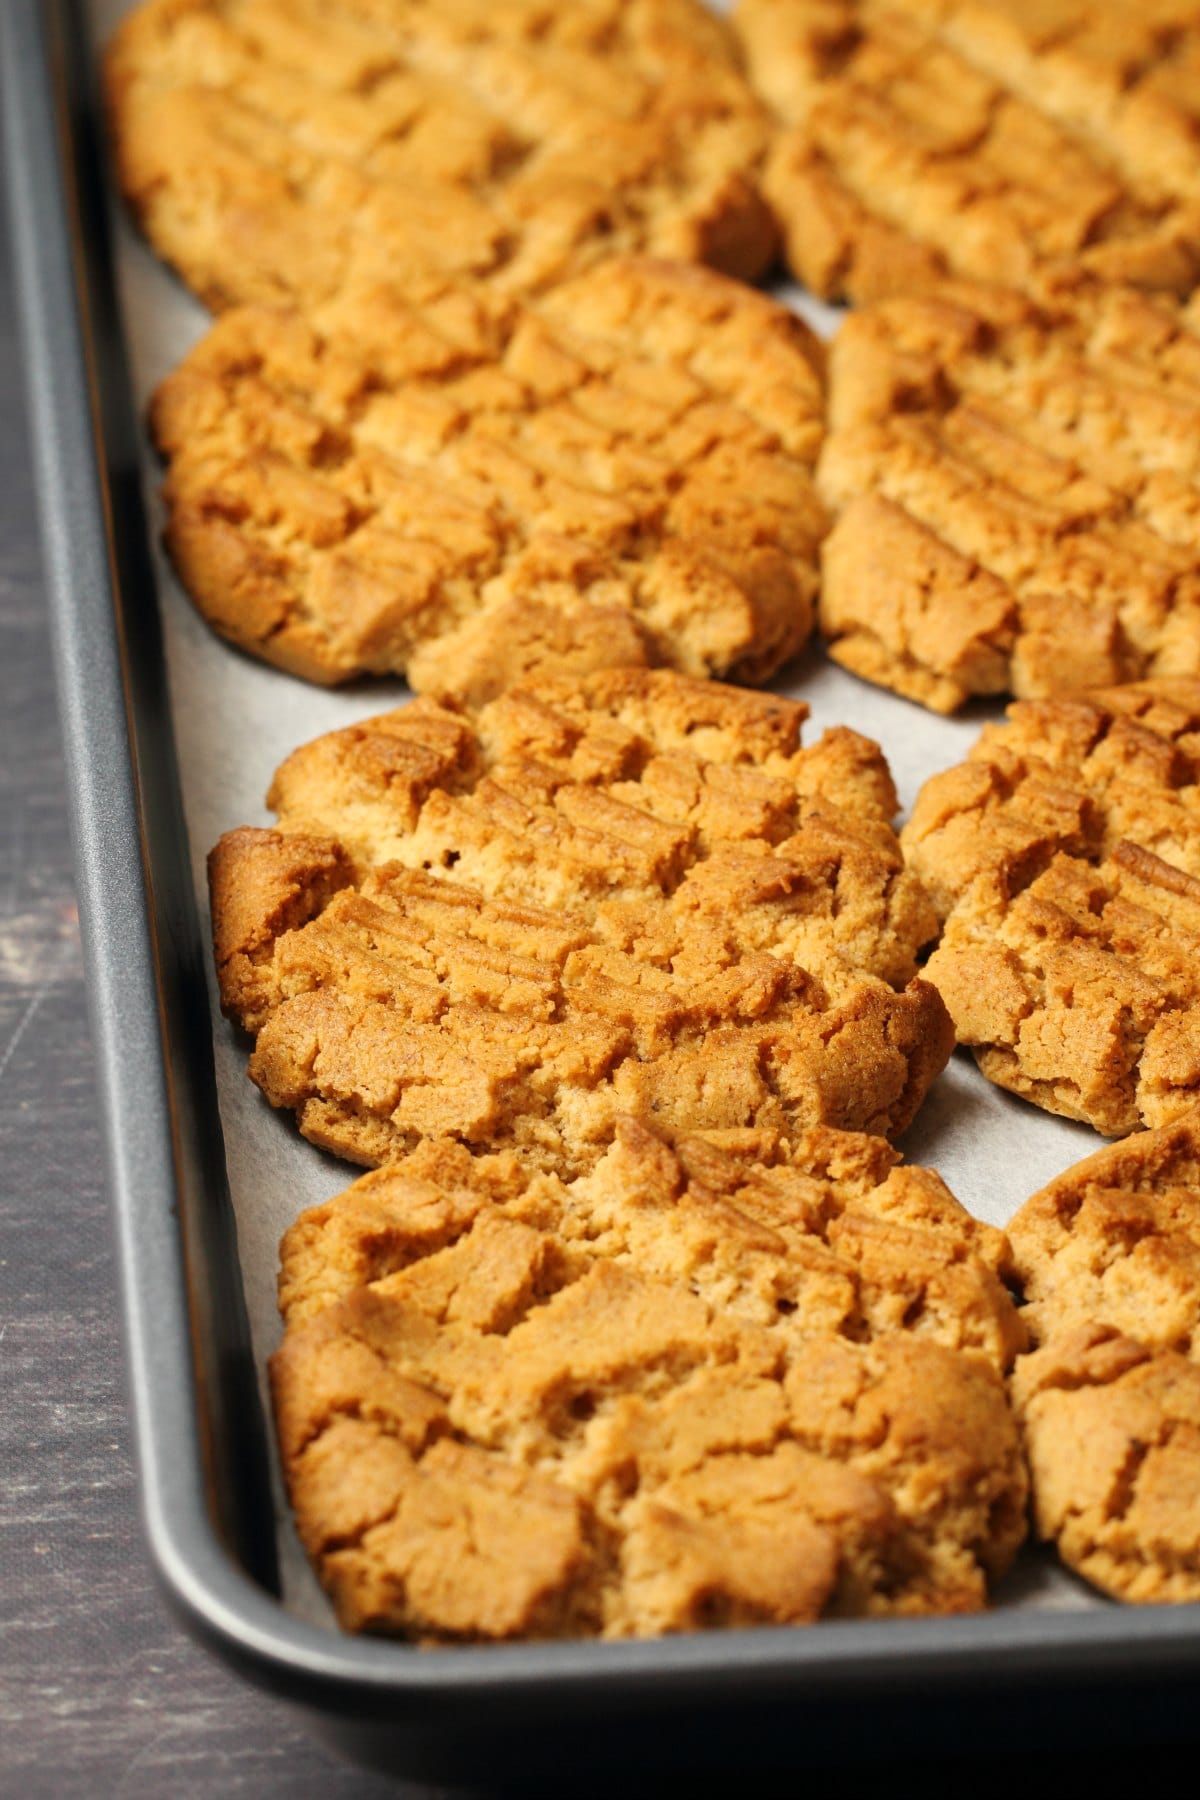 Freshly baked almond butter cookies on a parchment lined baking tray.